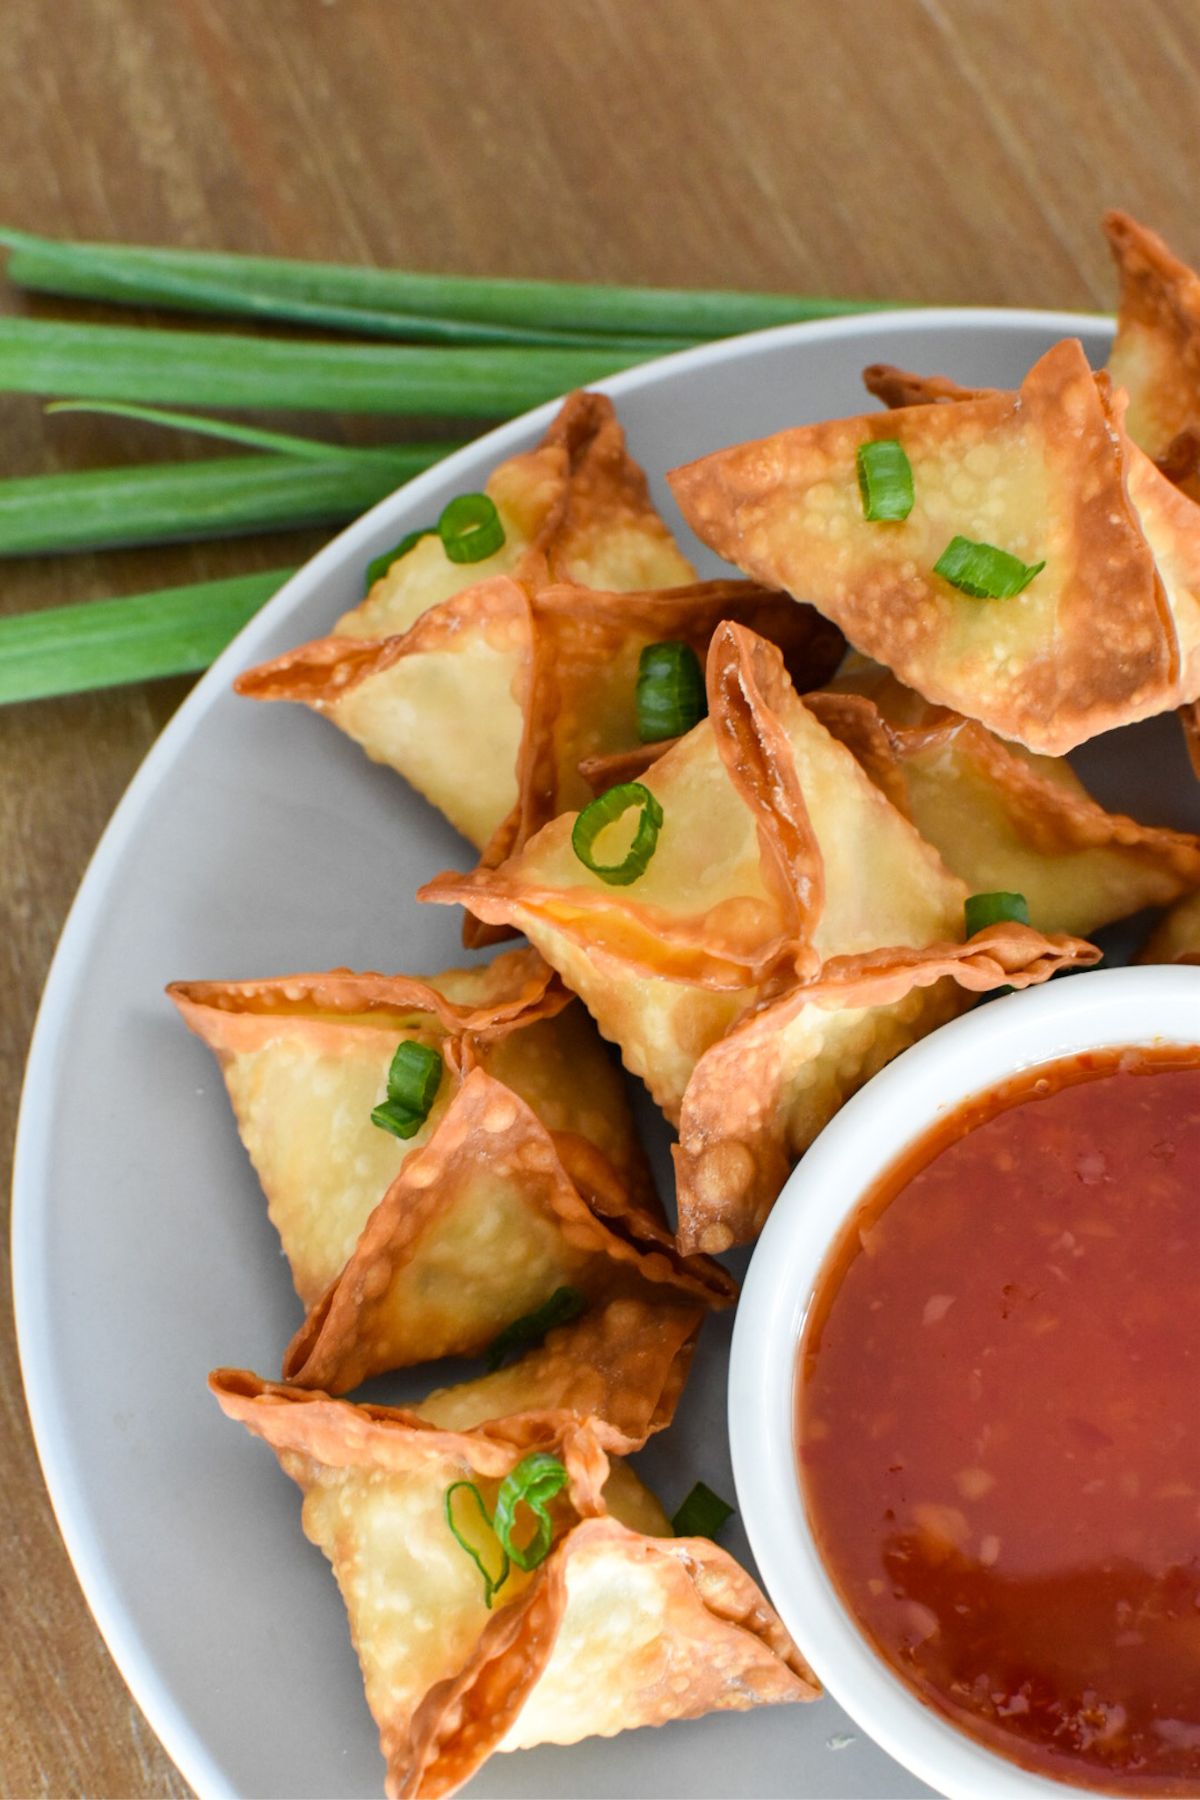 Crab rangoon stacked on a plate with a sweet chili dipping sauce next to it.